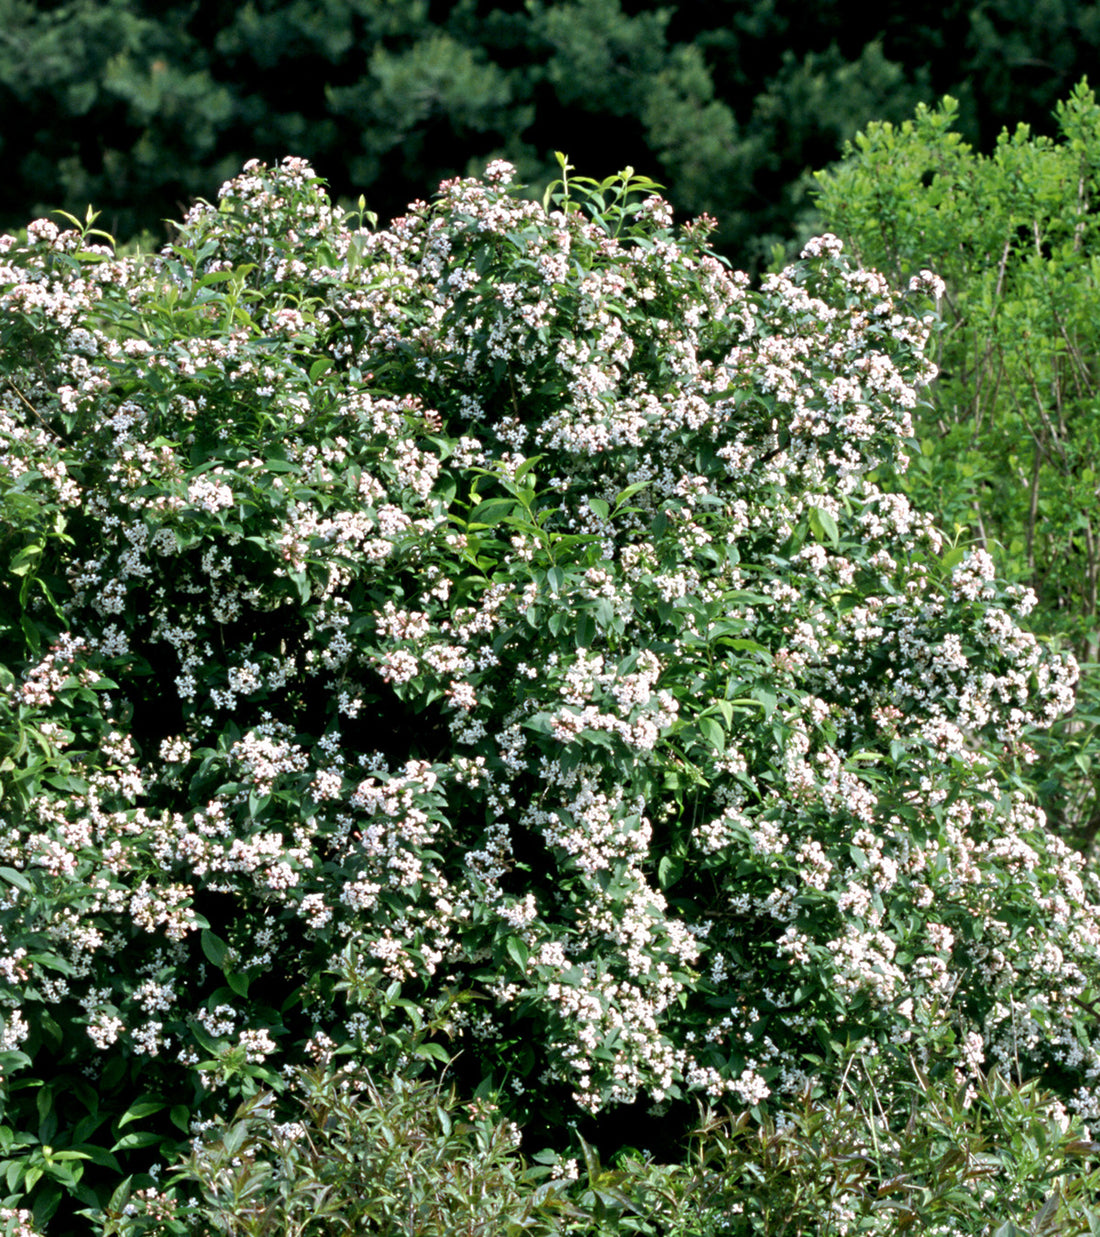 Abelia Sweet Emotion blooms in spring with the most amazing jasmine fragrance.